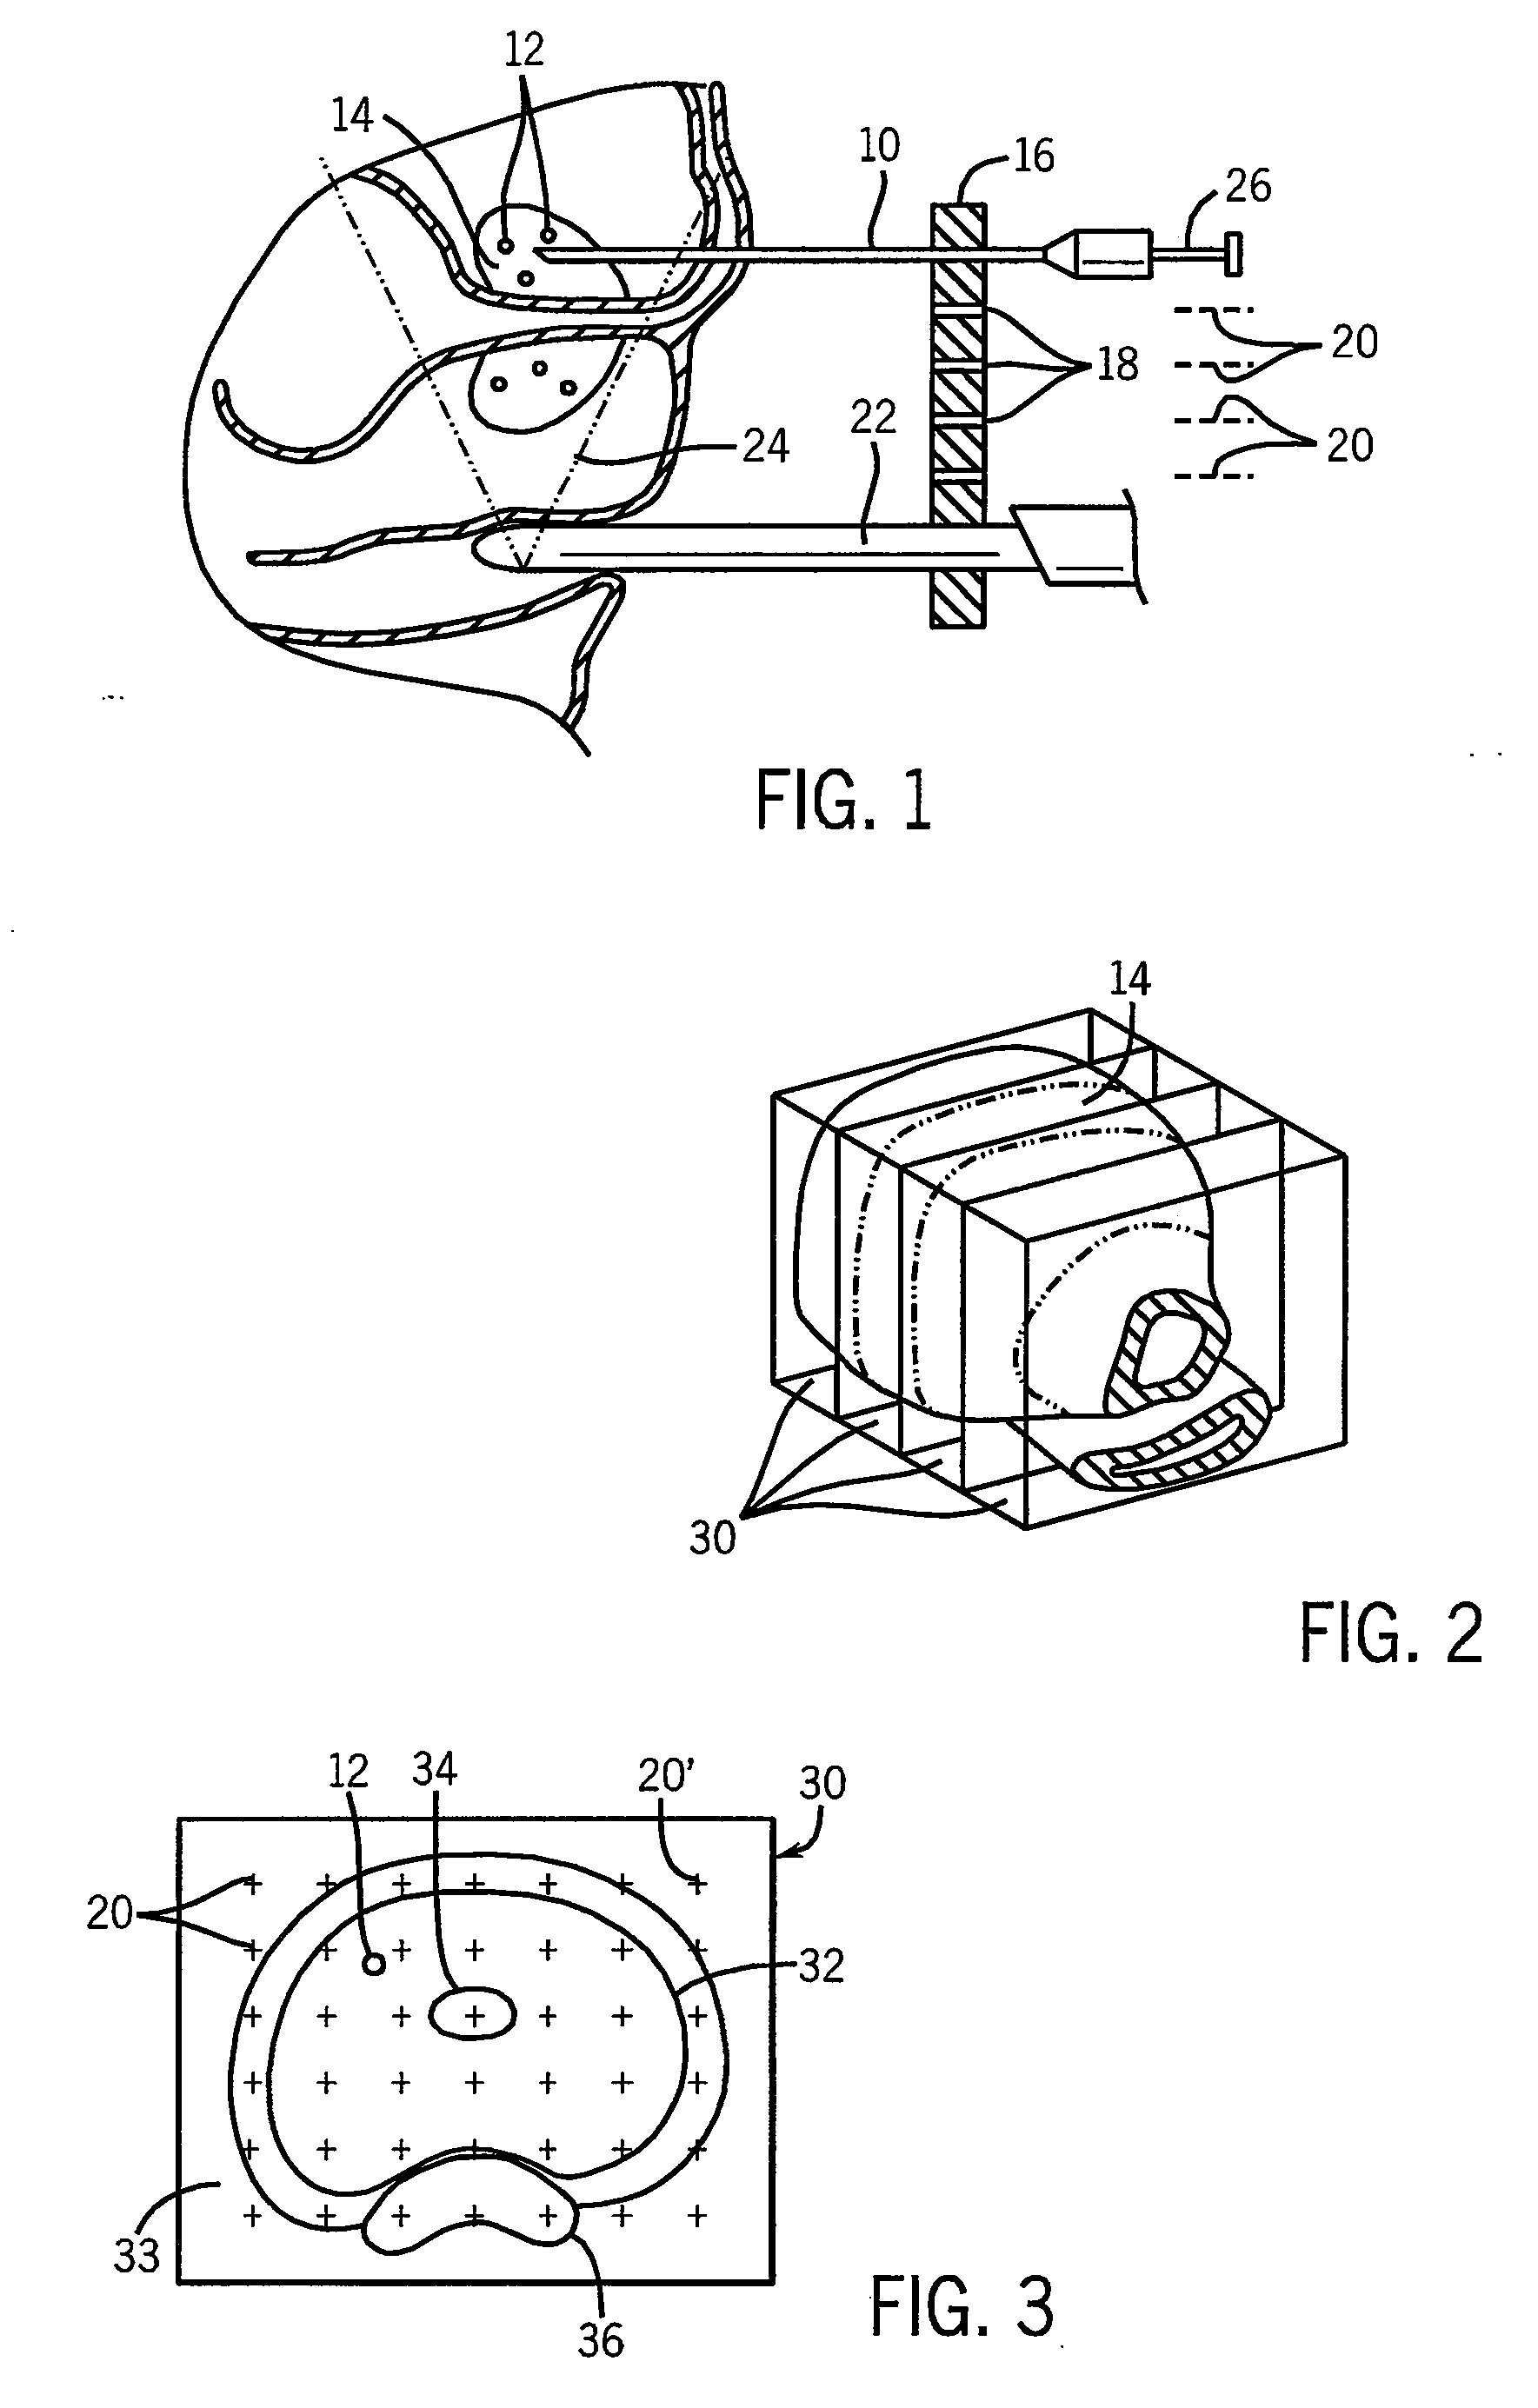 Method and apparatus for treatment planning using implanted radioactive sources